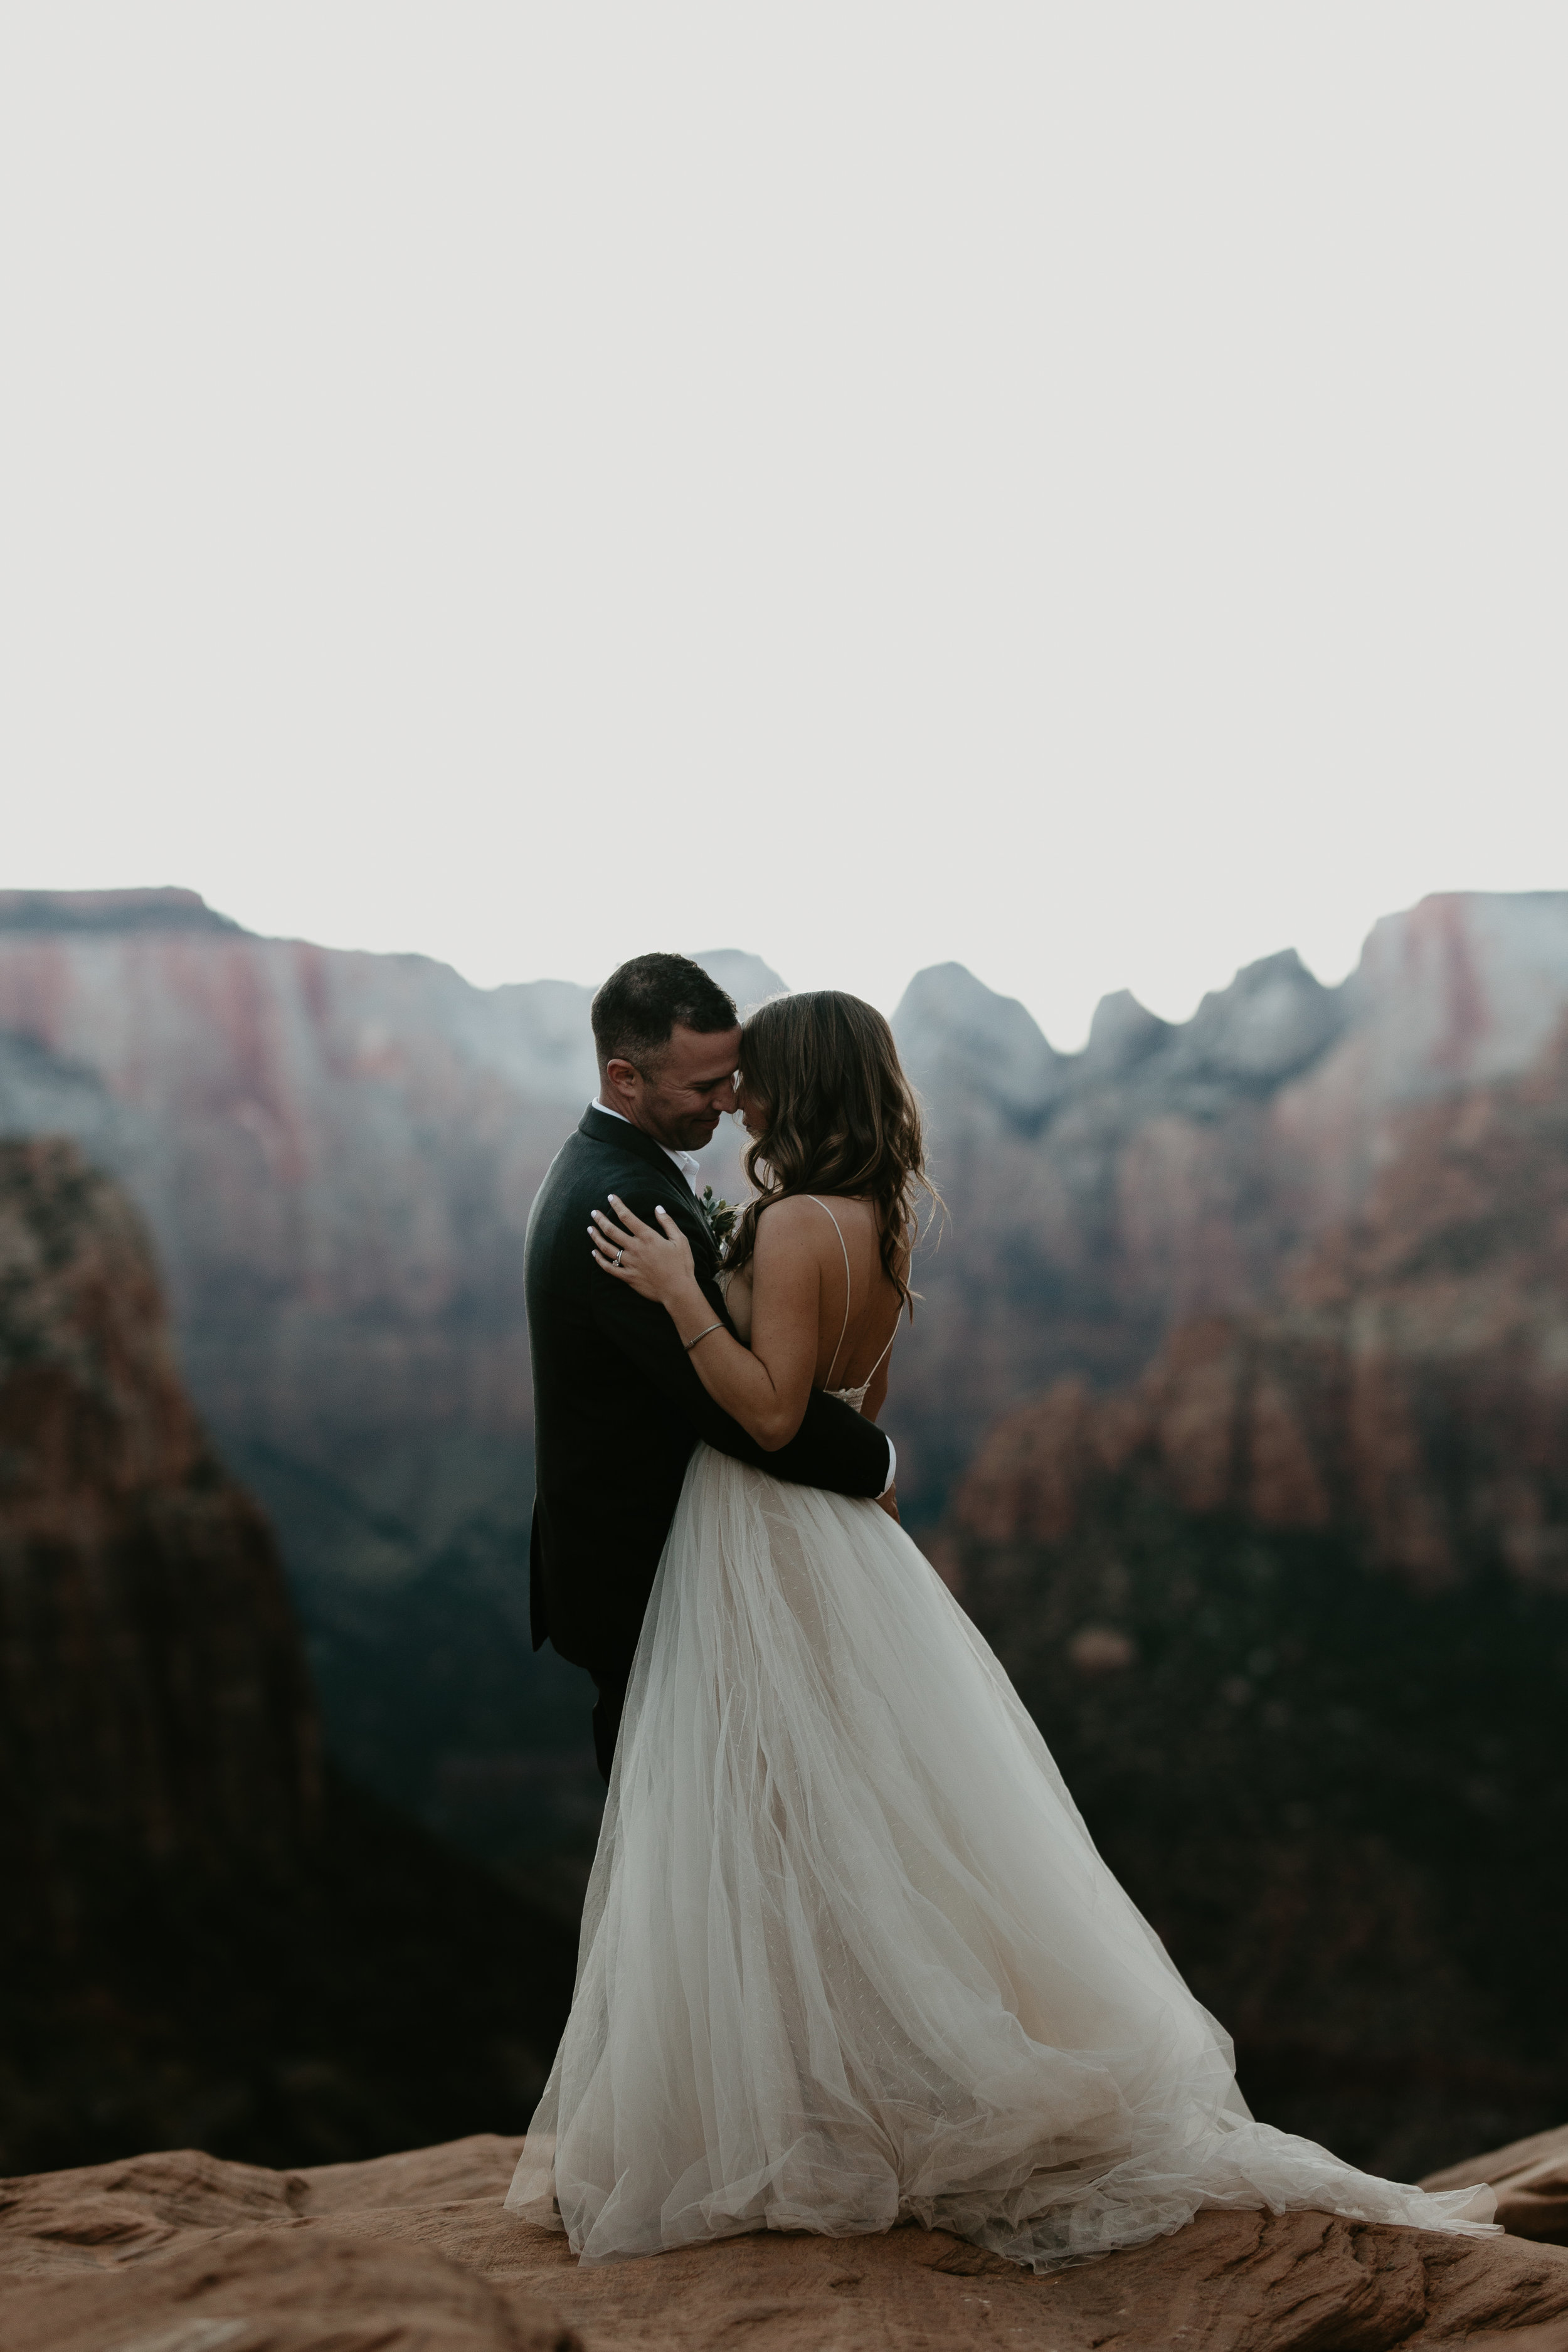 nicole-daacke-photography-zion-national-park-elopement-photographer-canyon-overlook-trail-elope-hiking-adventure-wedding-photos-fall-utah-red-rock-canyon-stgeorge-eloping-photographer-83.jpg